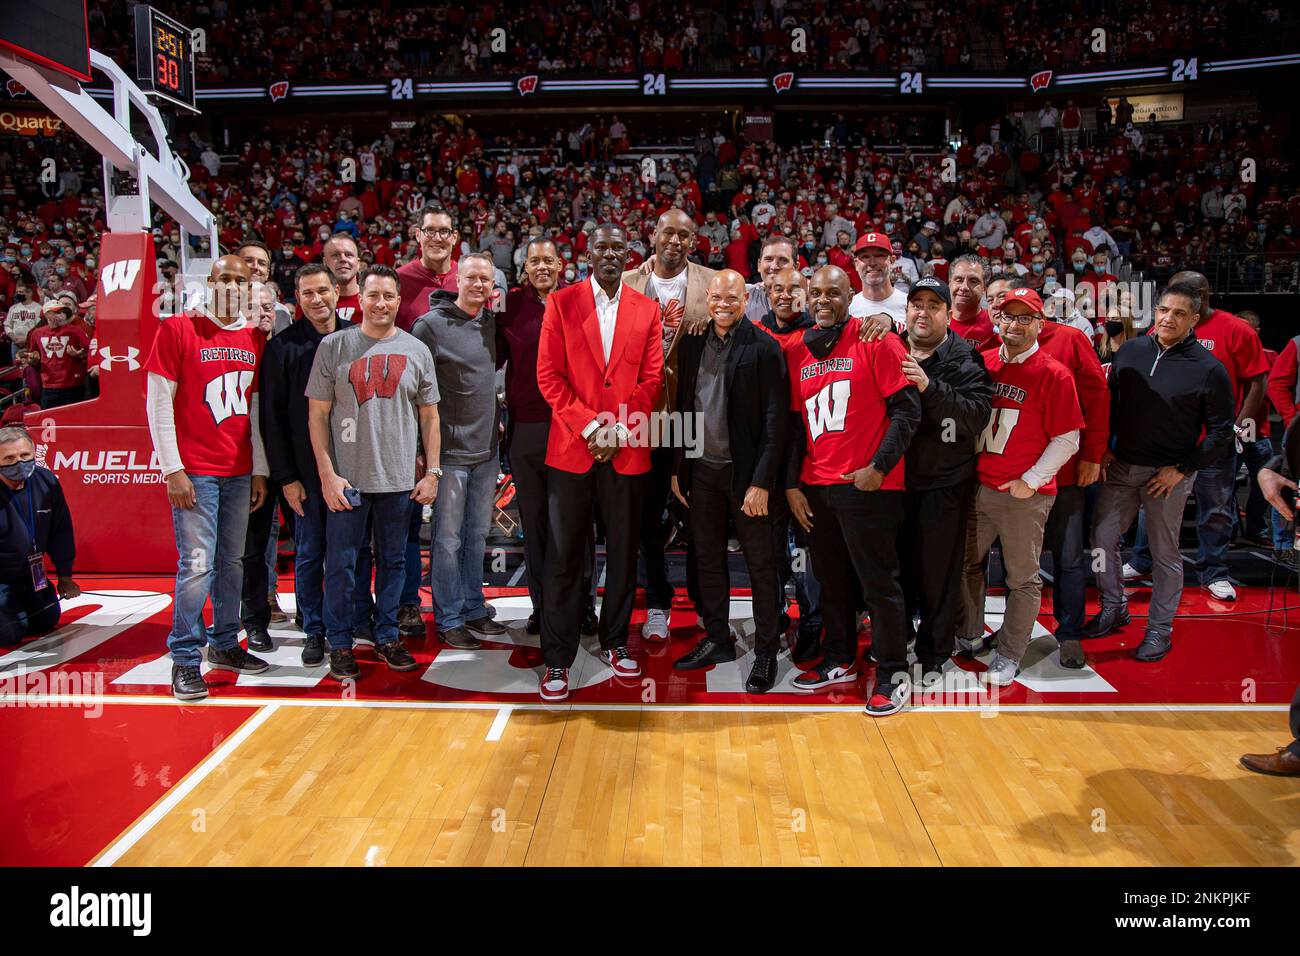 Former Wisconsin basketball player Michael Finley acknowledges the crowd  during a ceremony to retire his jersey number at halftime of an NCAA college  basketball game between Wisconsin and Michigan Sunday, Feb. 20